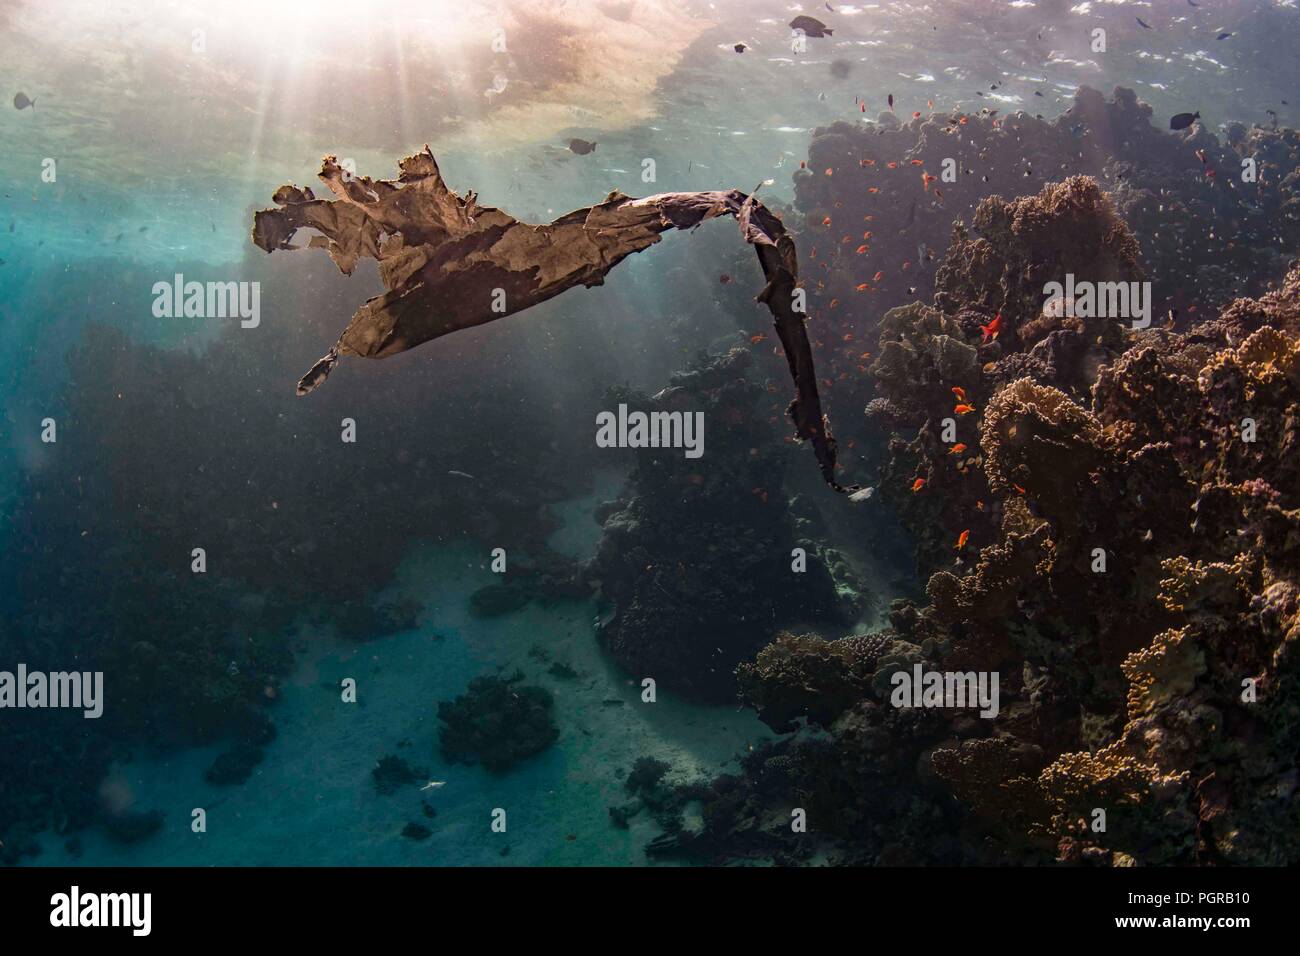 A piece of plastic bag shaped like a bird floats above a coral reef Stock Photo